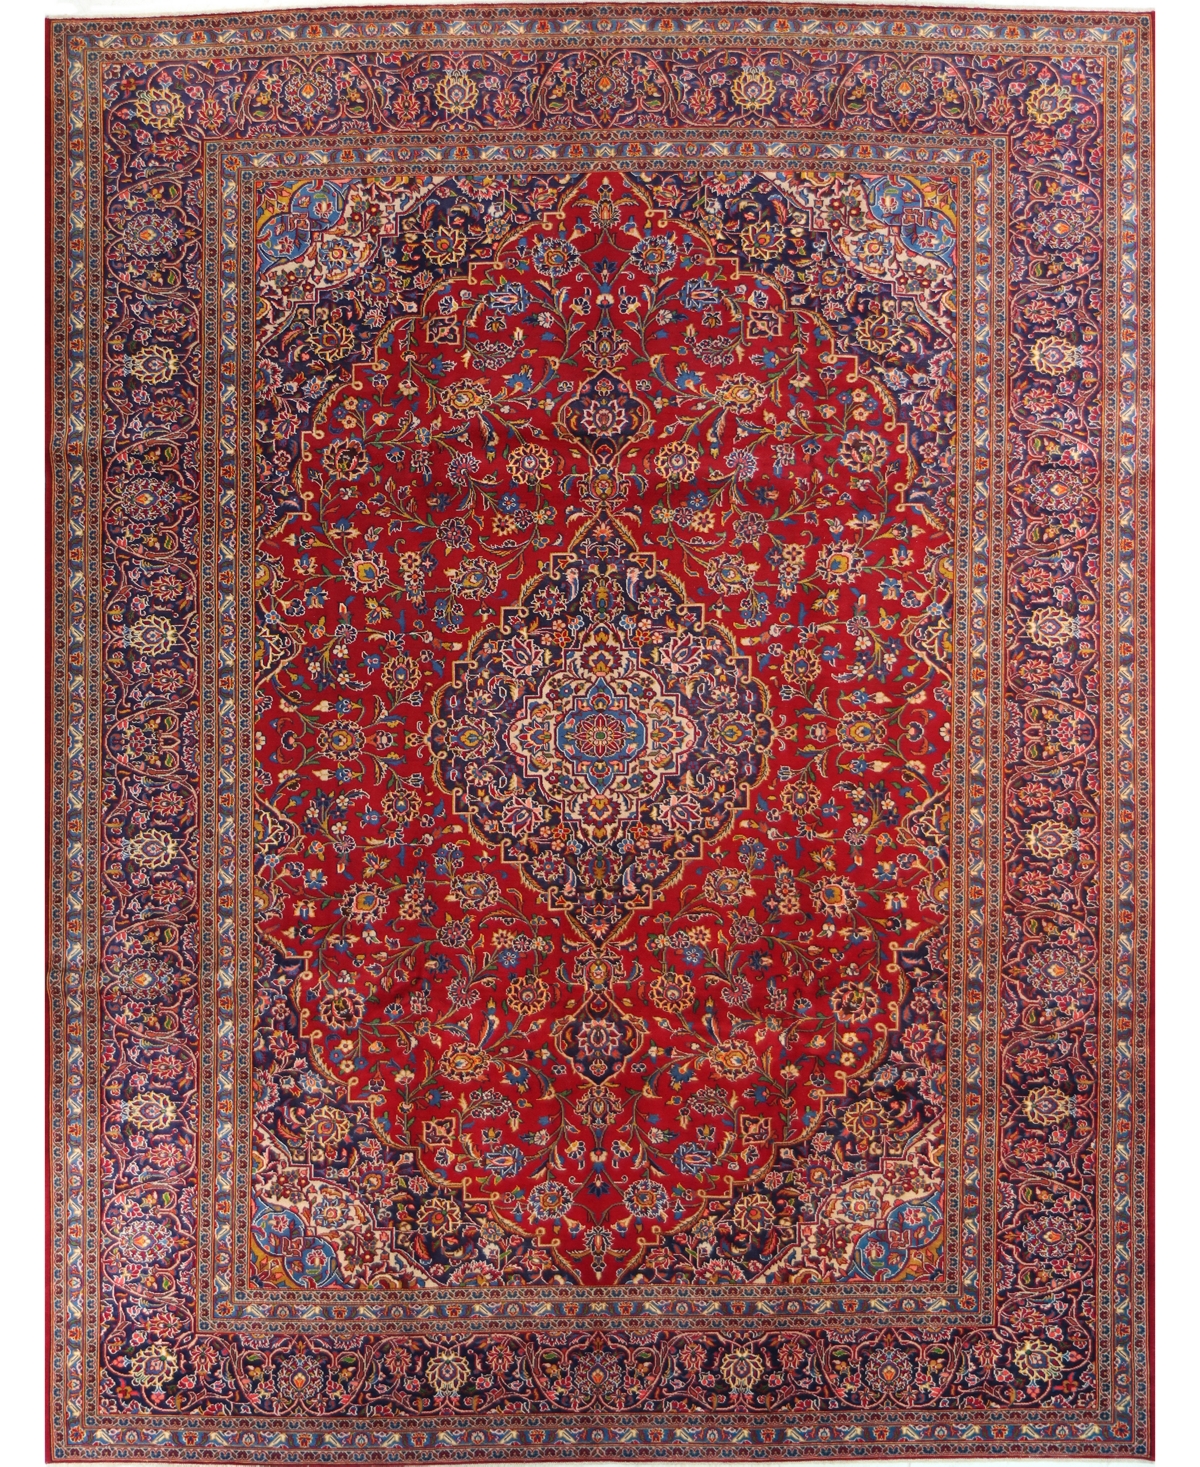 Bb Rugs One Of A Kind Kashan 621211 9'7" X 12'7" Area Rug In Red